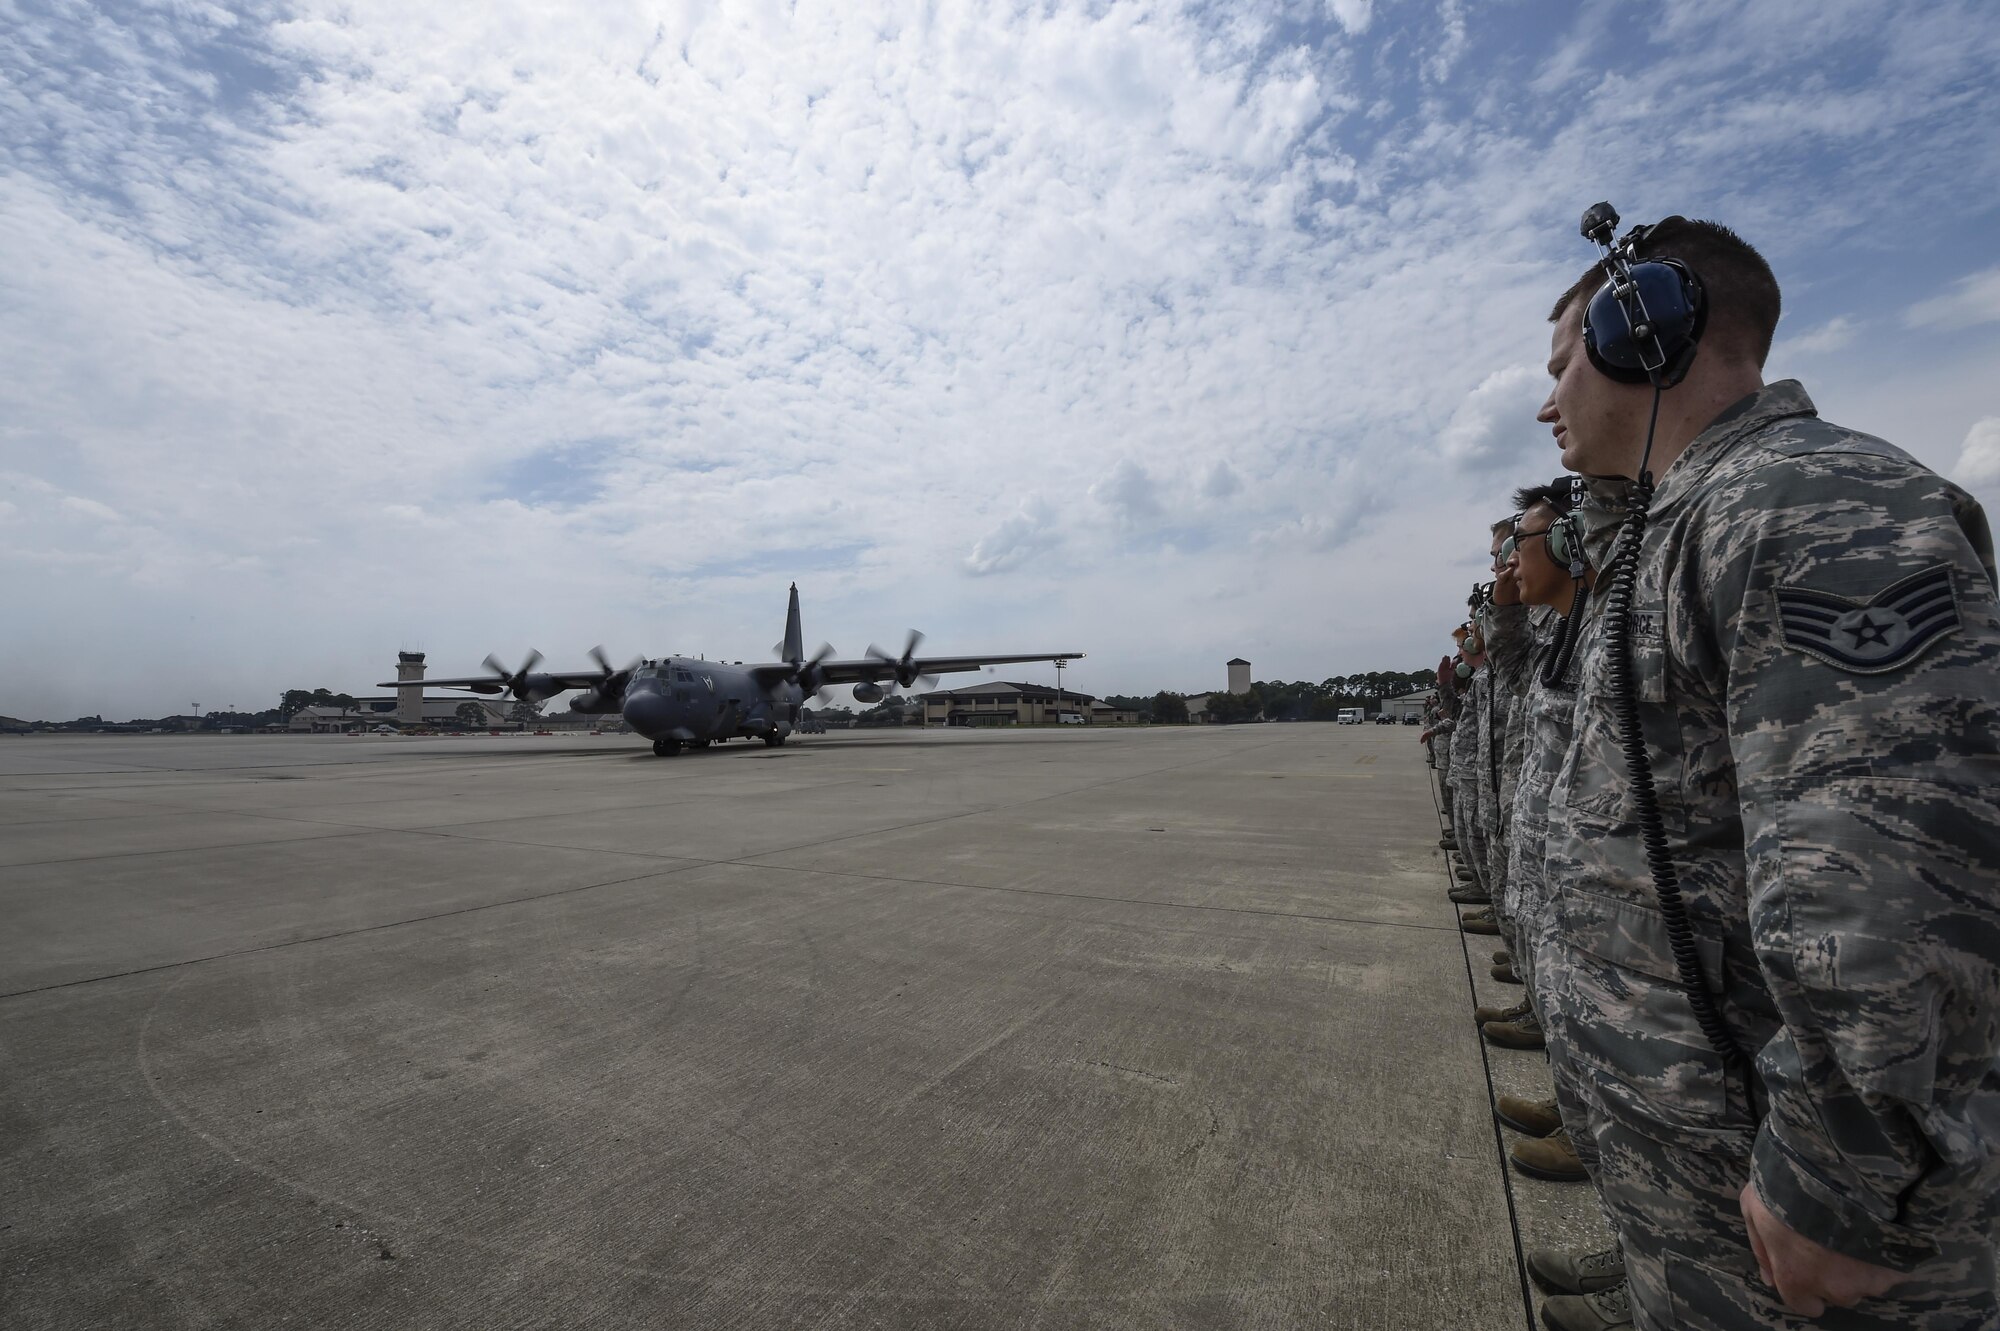 Airmen with the 1st Special Operations Aircraft Maintenance Squadron render a salute to an AC-130U Spooky before its retirement flight at Hurlburt Field, Fla., Sept. 21, 2015. Tail number 0163, “Bad Omen,” was retired Sept. 21, 2015, after more than 20 years of service. “Bad Omen” last deployed to Bagram Airfield, Afghanistan in December 2013 where it accumulated approximately 600 combat hours and flew more than 100 sorties. (U.S. Air Force photo by Airman Kai White)